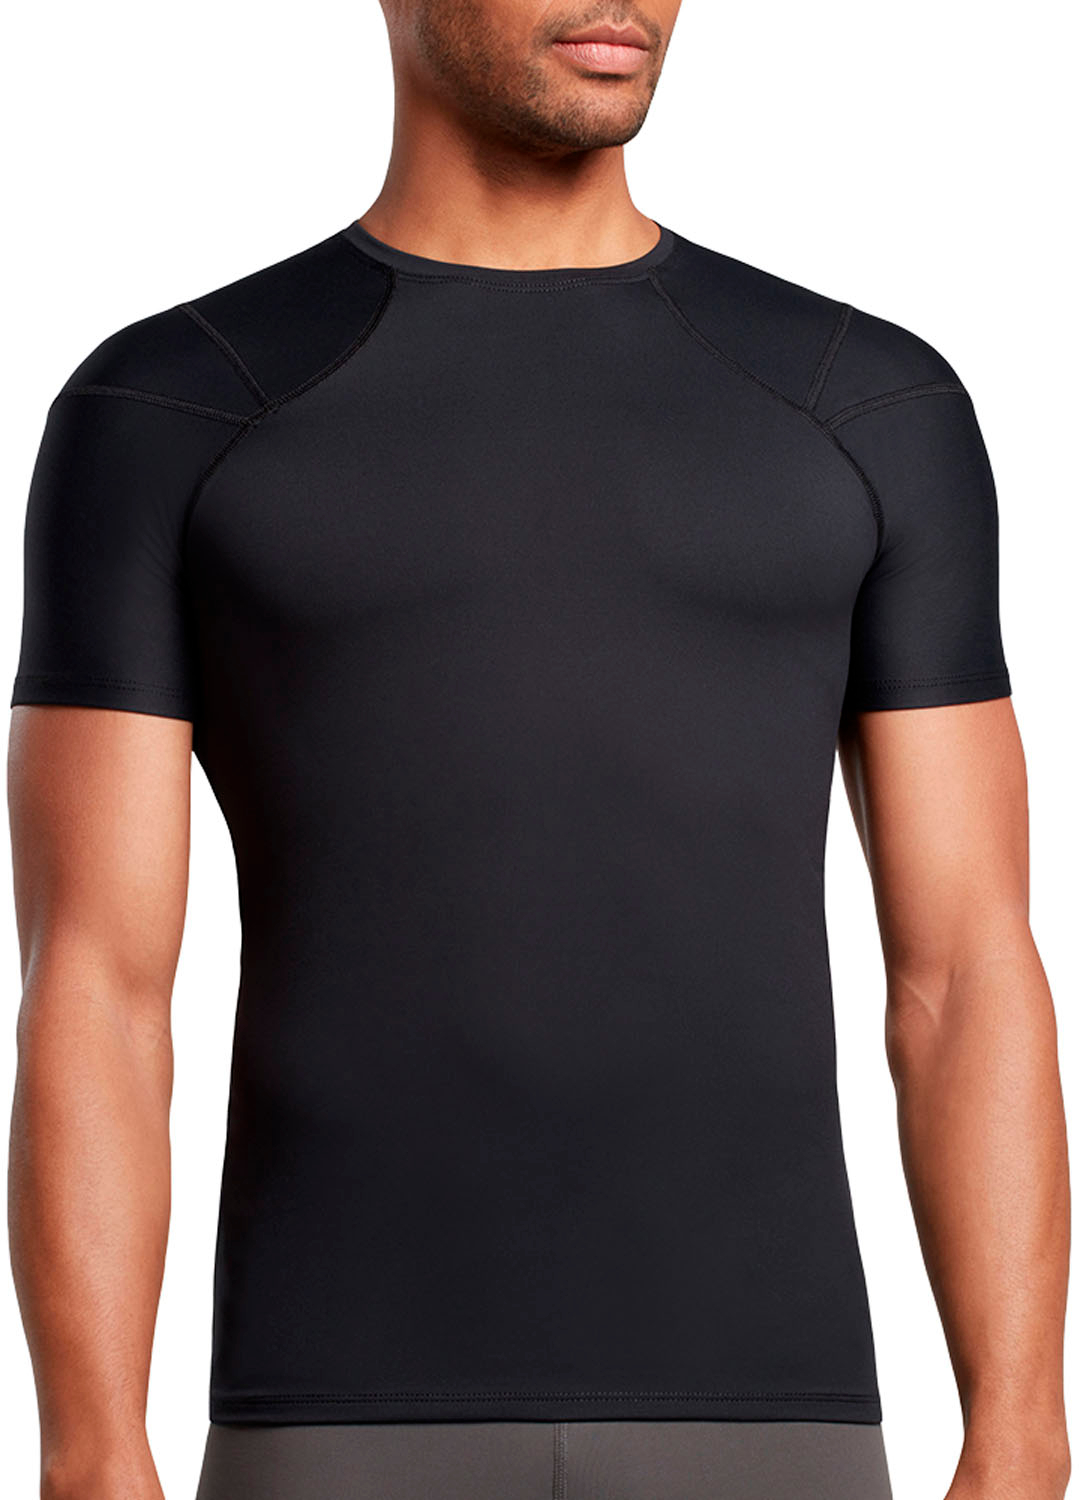 Angle View: Hover-1 - Padded Tank Top - Black - Size Medium